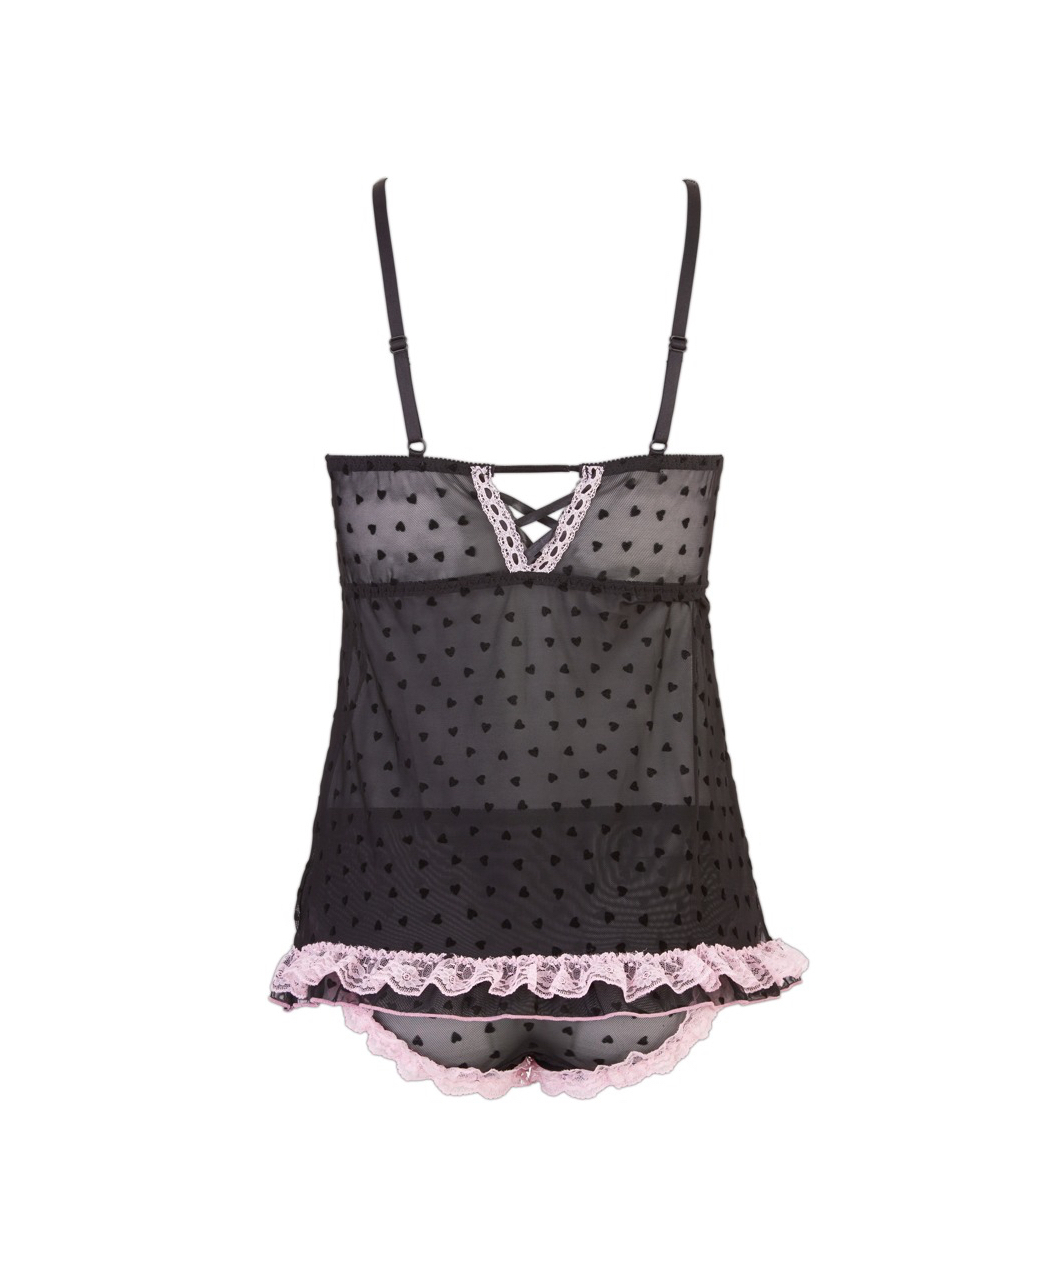 Cottelli Lingerie black babydoll with pink lace trim